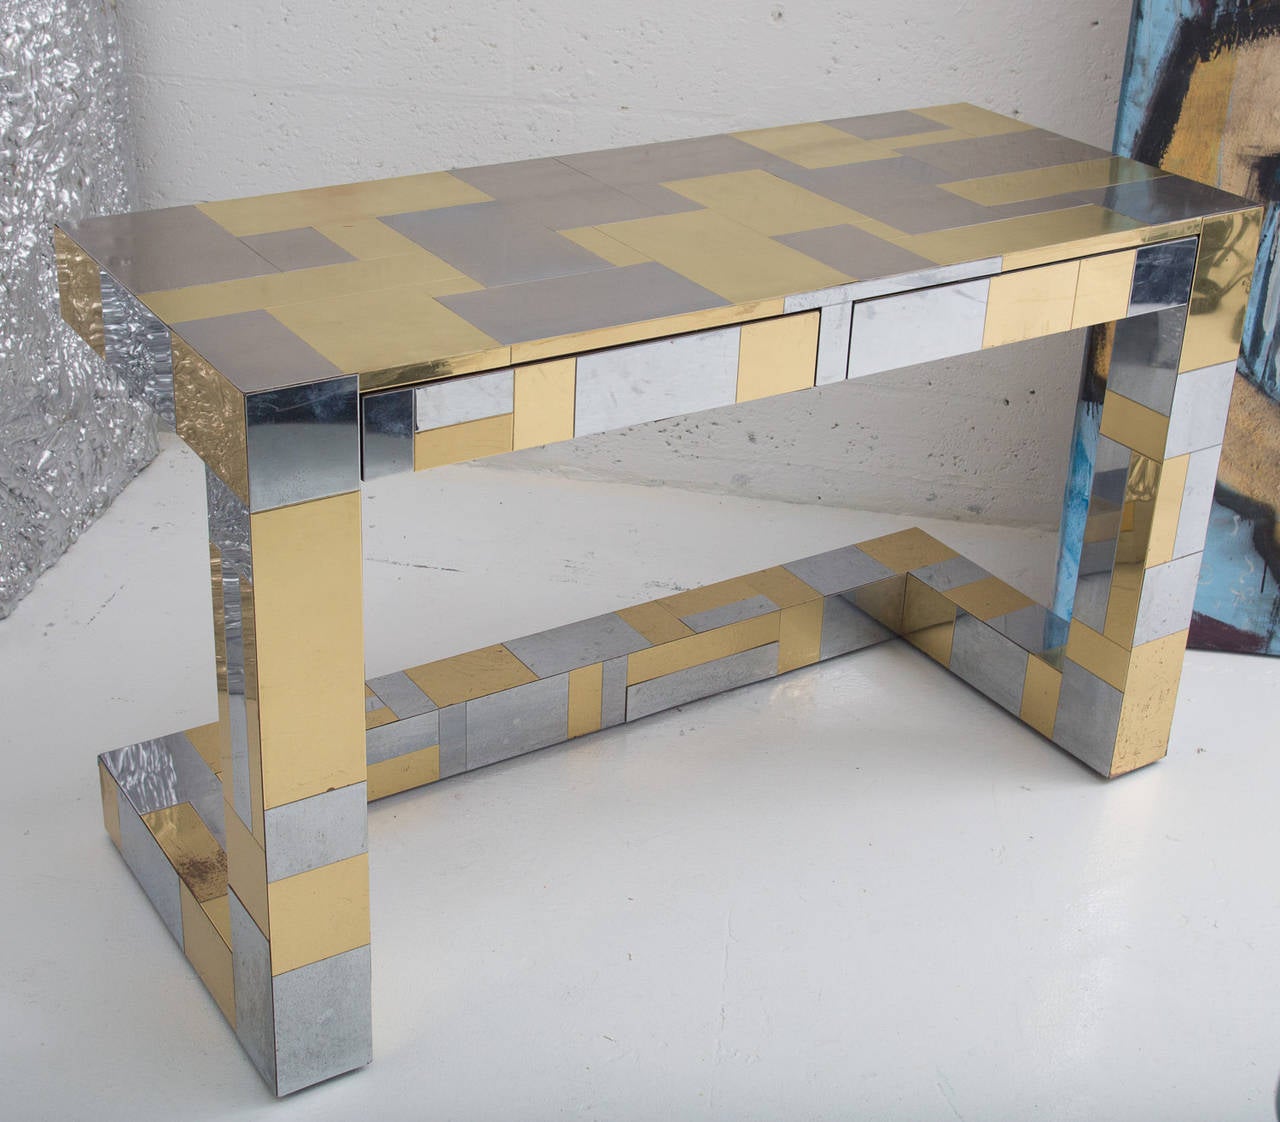 Cityscape desk by Paul Evans for Directional.
Steel and brass veneer, two drawers on cantilevered base.
Vintage conditions with few dings and scratches.
Signed.